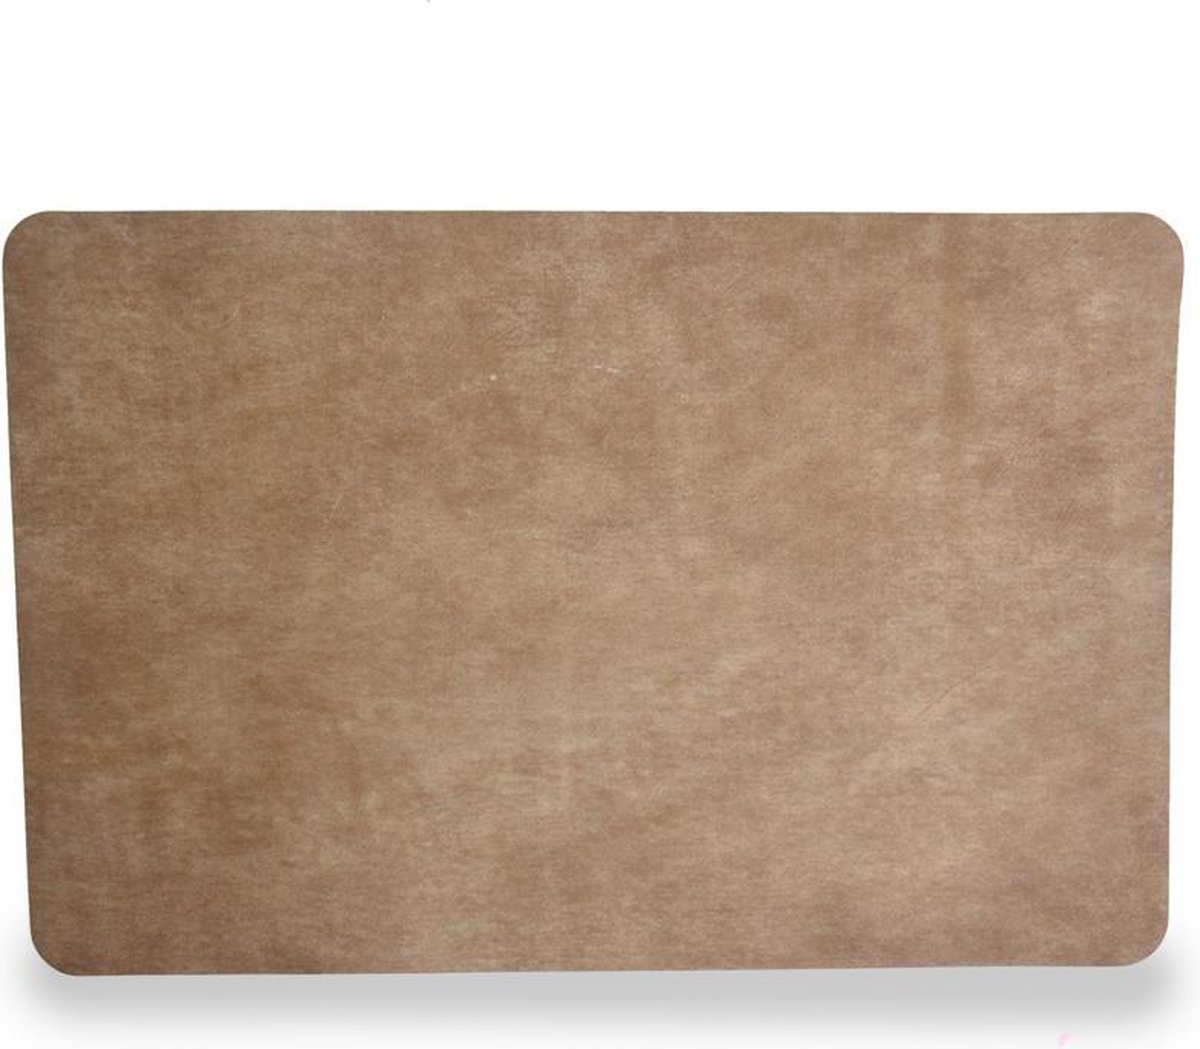 Tannery Leather Placemats Excellent Leer 2 stuks Taupe Rechthoek